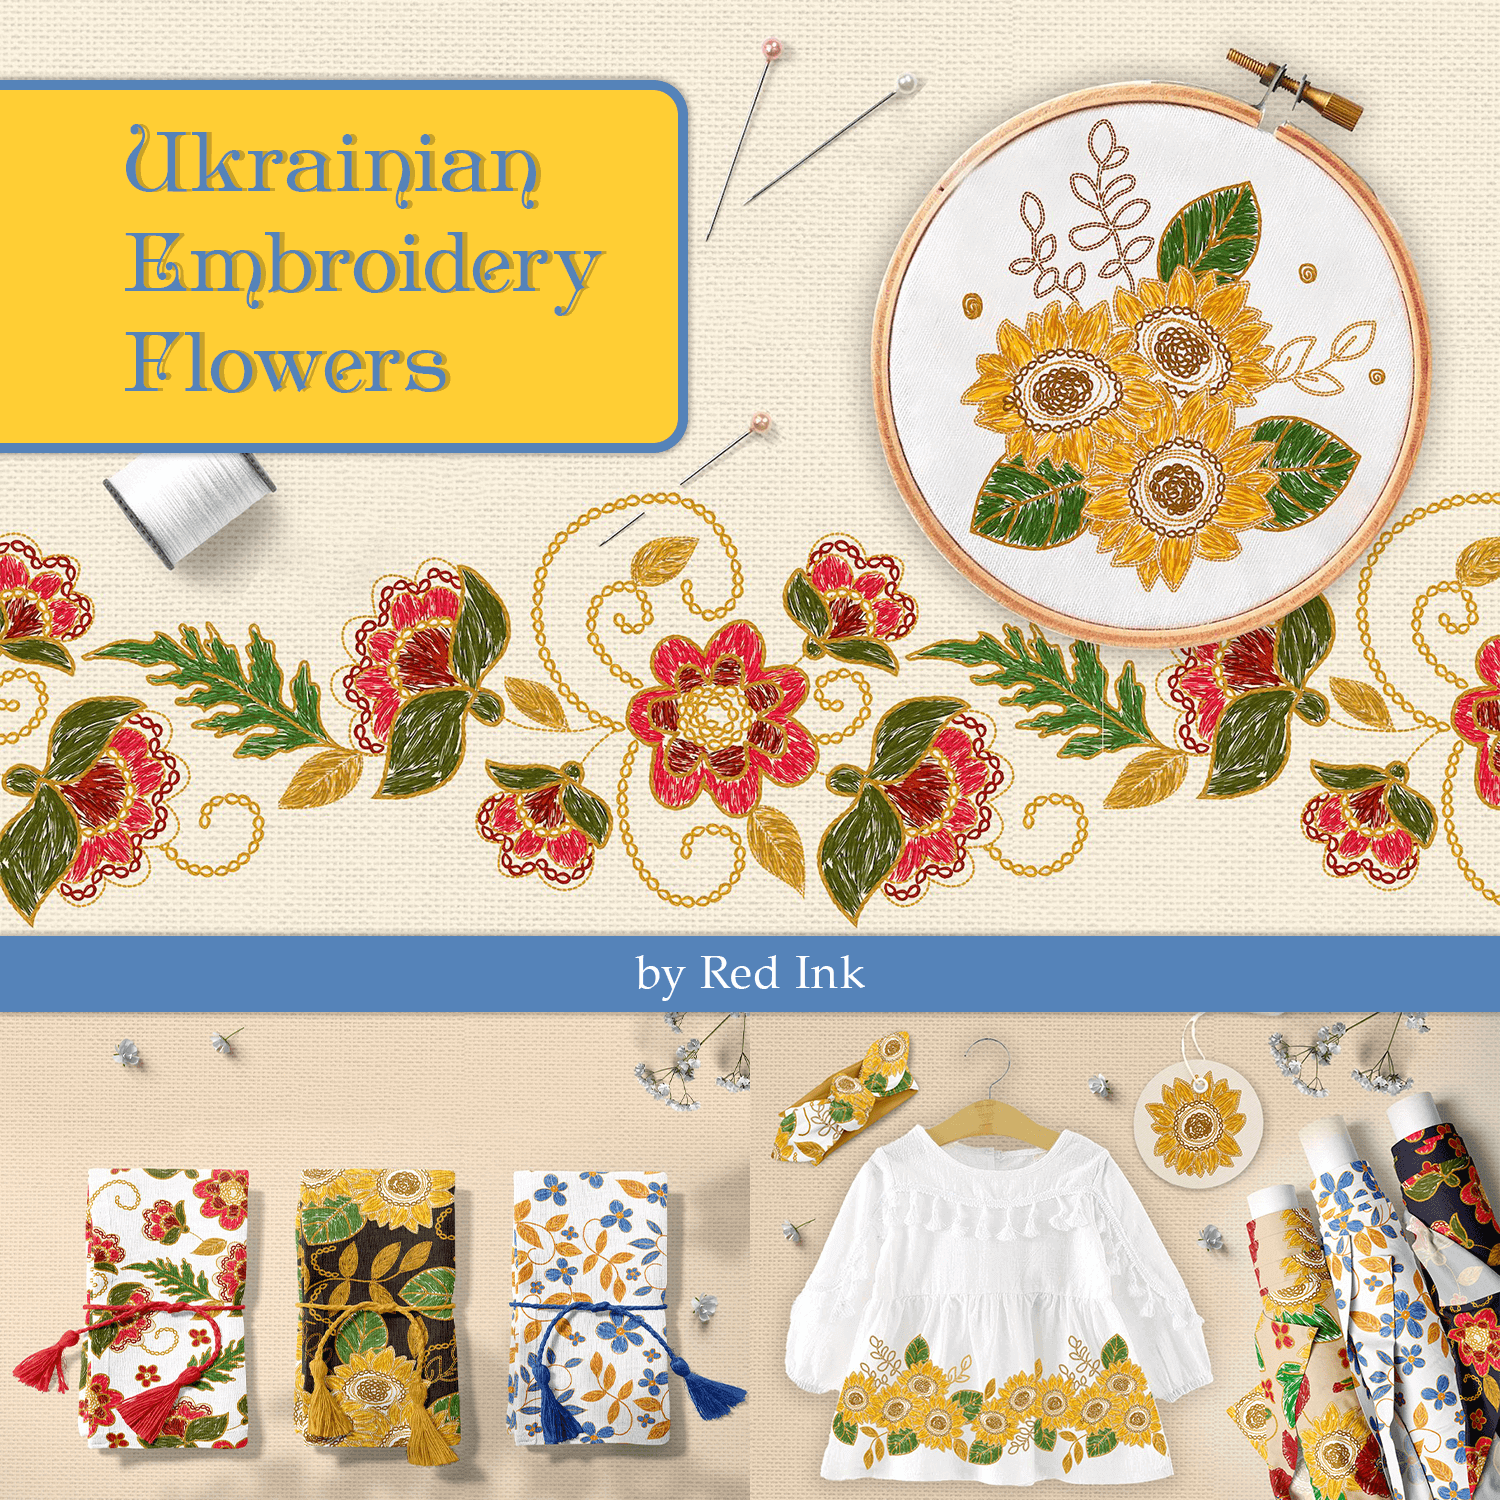 A Beautiful Ukrainian Embroidery of Poppies & Leaves. Folk Textiles.